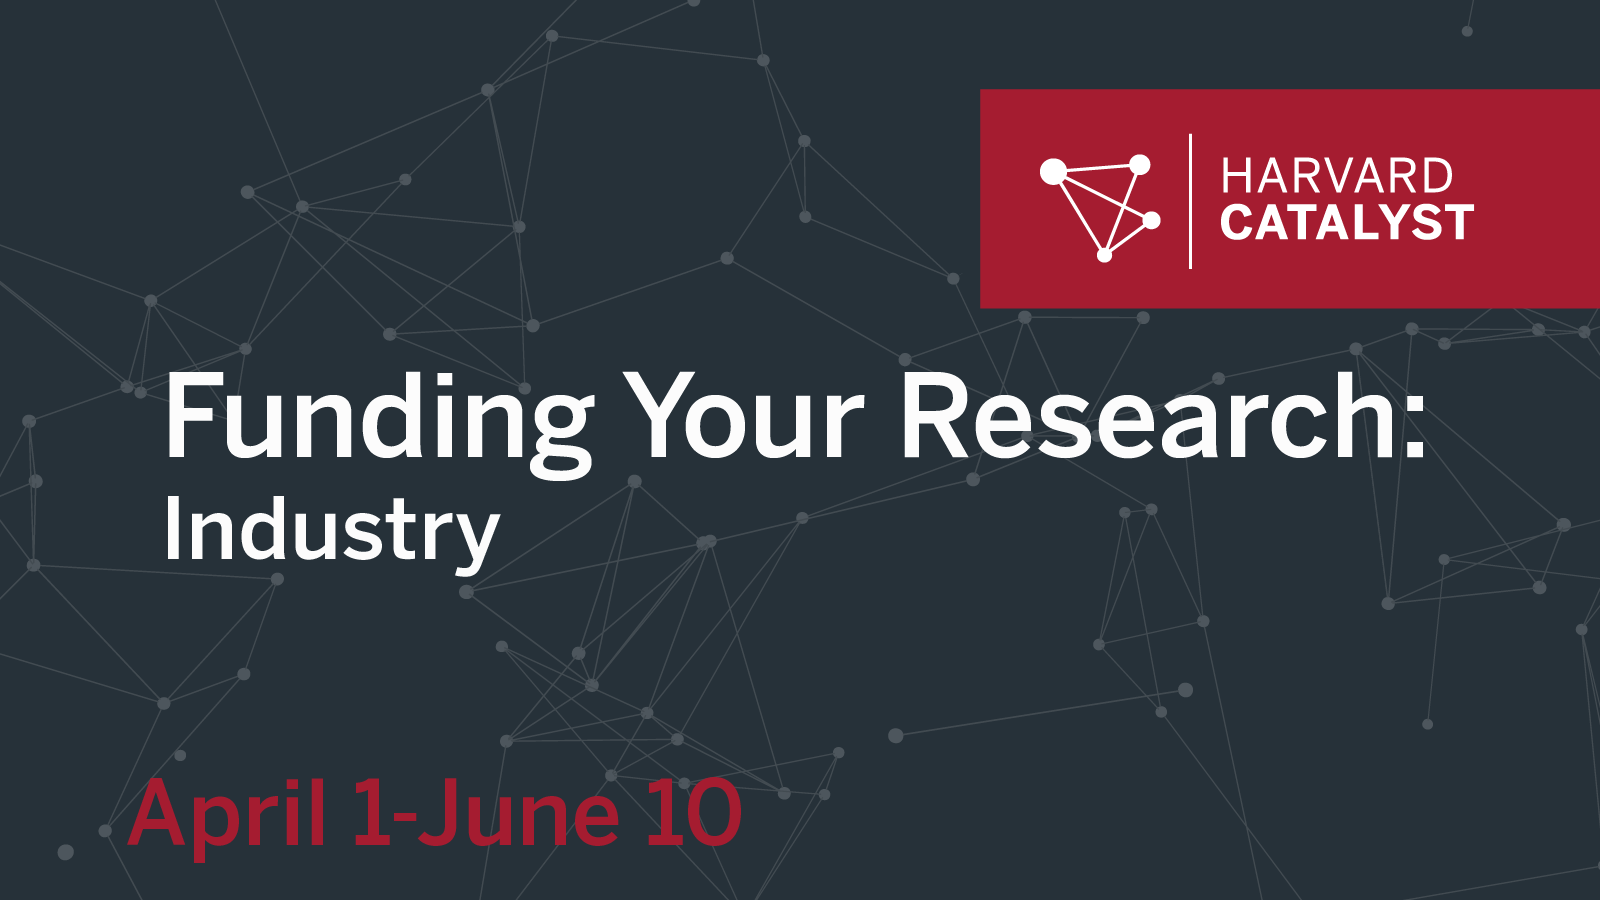 Funding Your Research: Industry course graphic with dates and Harvard Catalyst logo